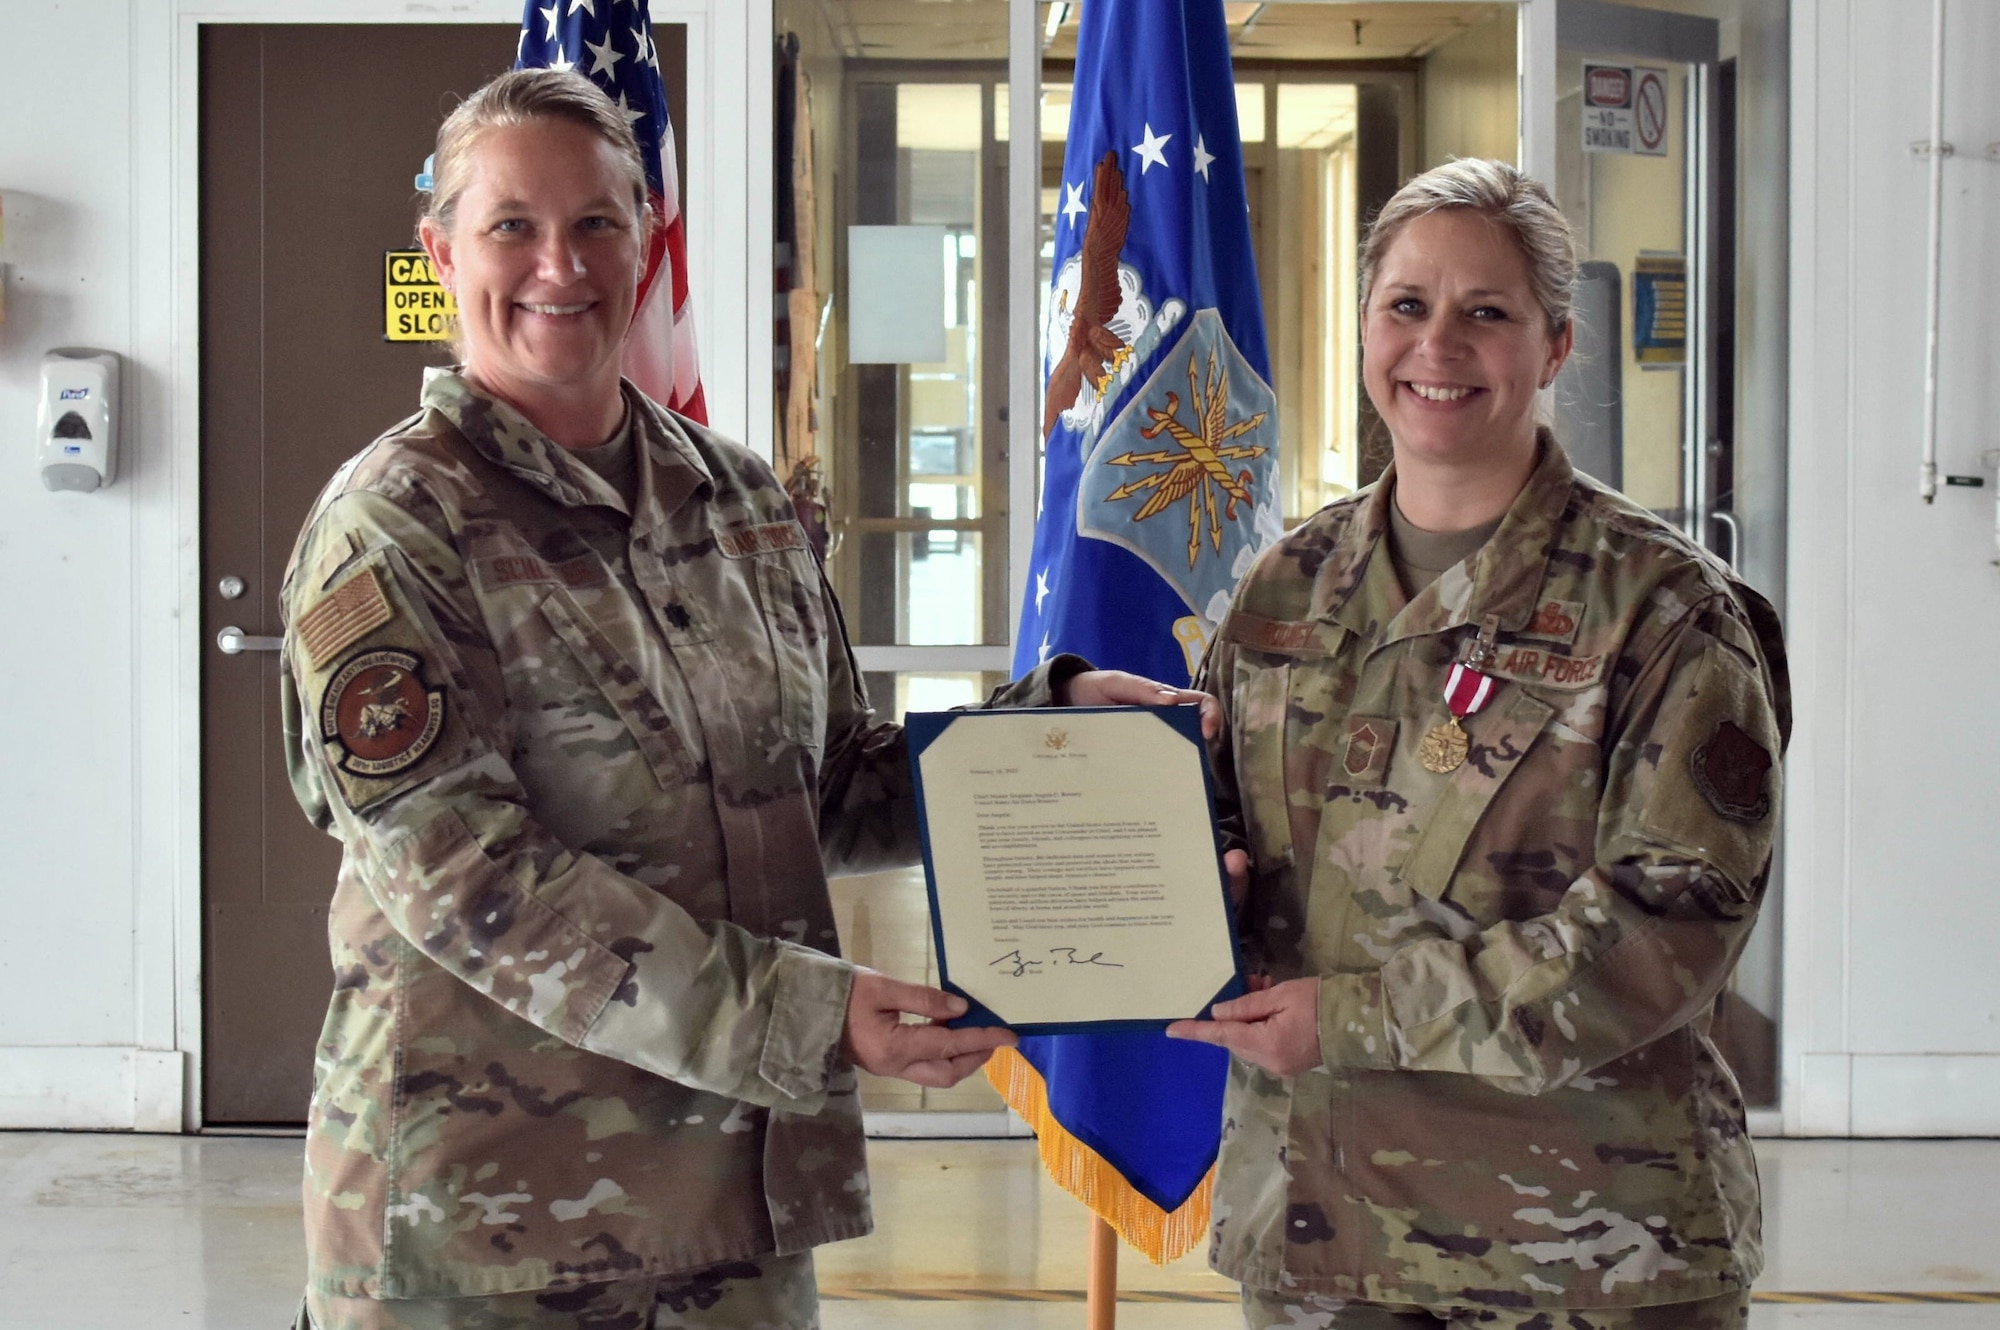 Lt. Col. Farrah Schluter, 301st Fighter Wing Logistics Readiness Squadron commander, and Chief Master Sgt. Angela Rooney, 301 FW LRS senior enlisted leader, hold Rooney’s certificate of appreciation signed by former U.S. President, George W. Bush at Naval Air Station Joint Reserve Base Fort Worth, Texas on June 4, 2022. President Bush thanked Rooney for her 25 years of military service. (U.S. Air Force photo by Staff Sgt. Randall Moose)